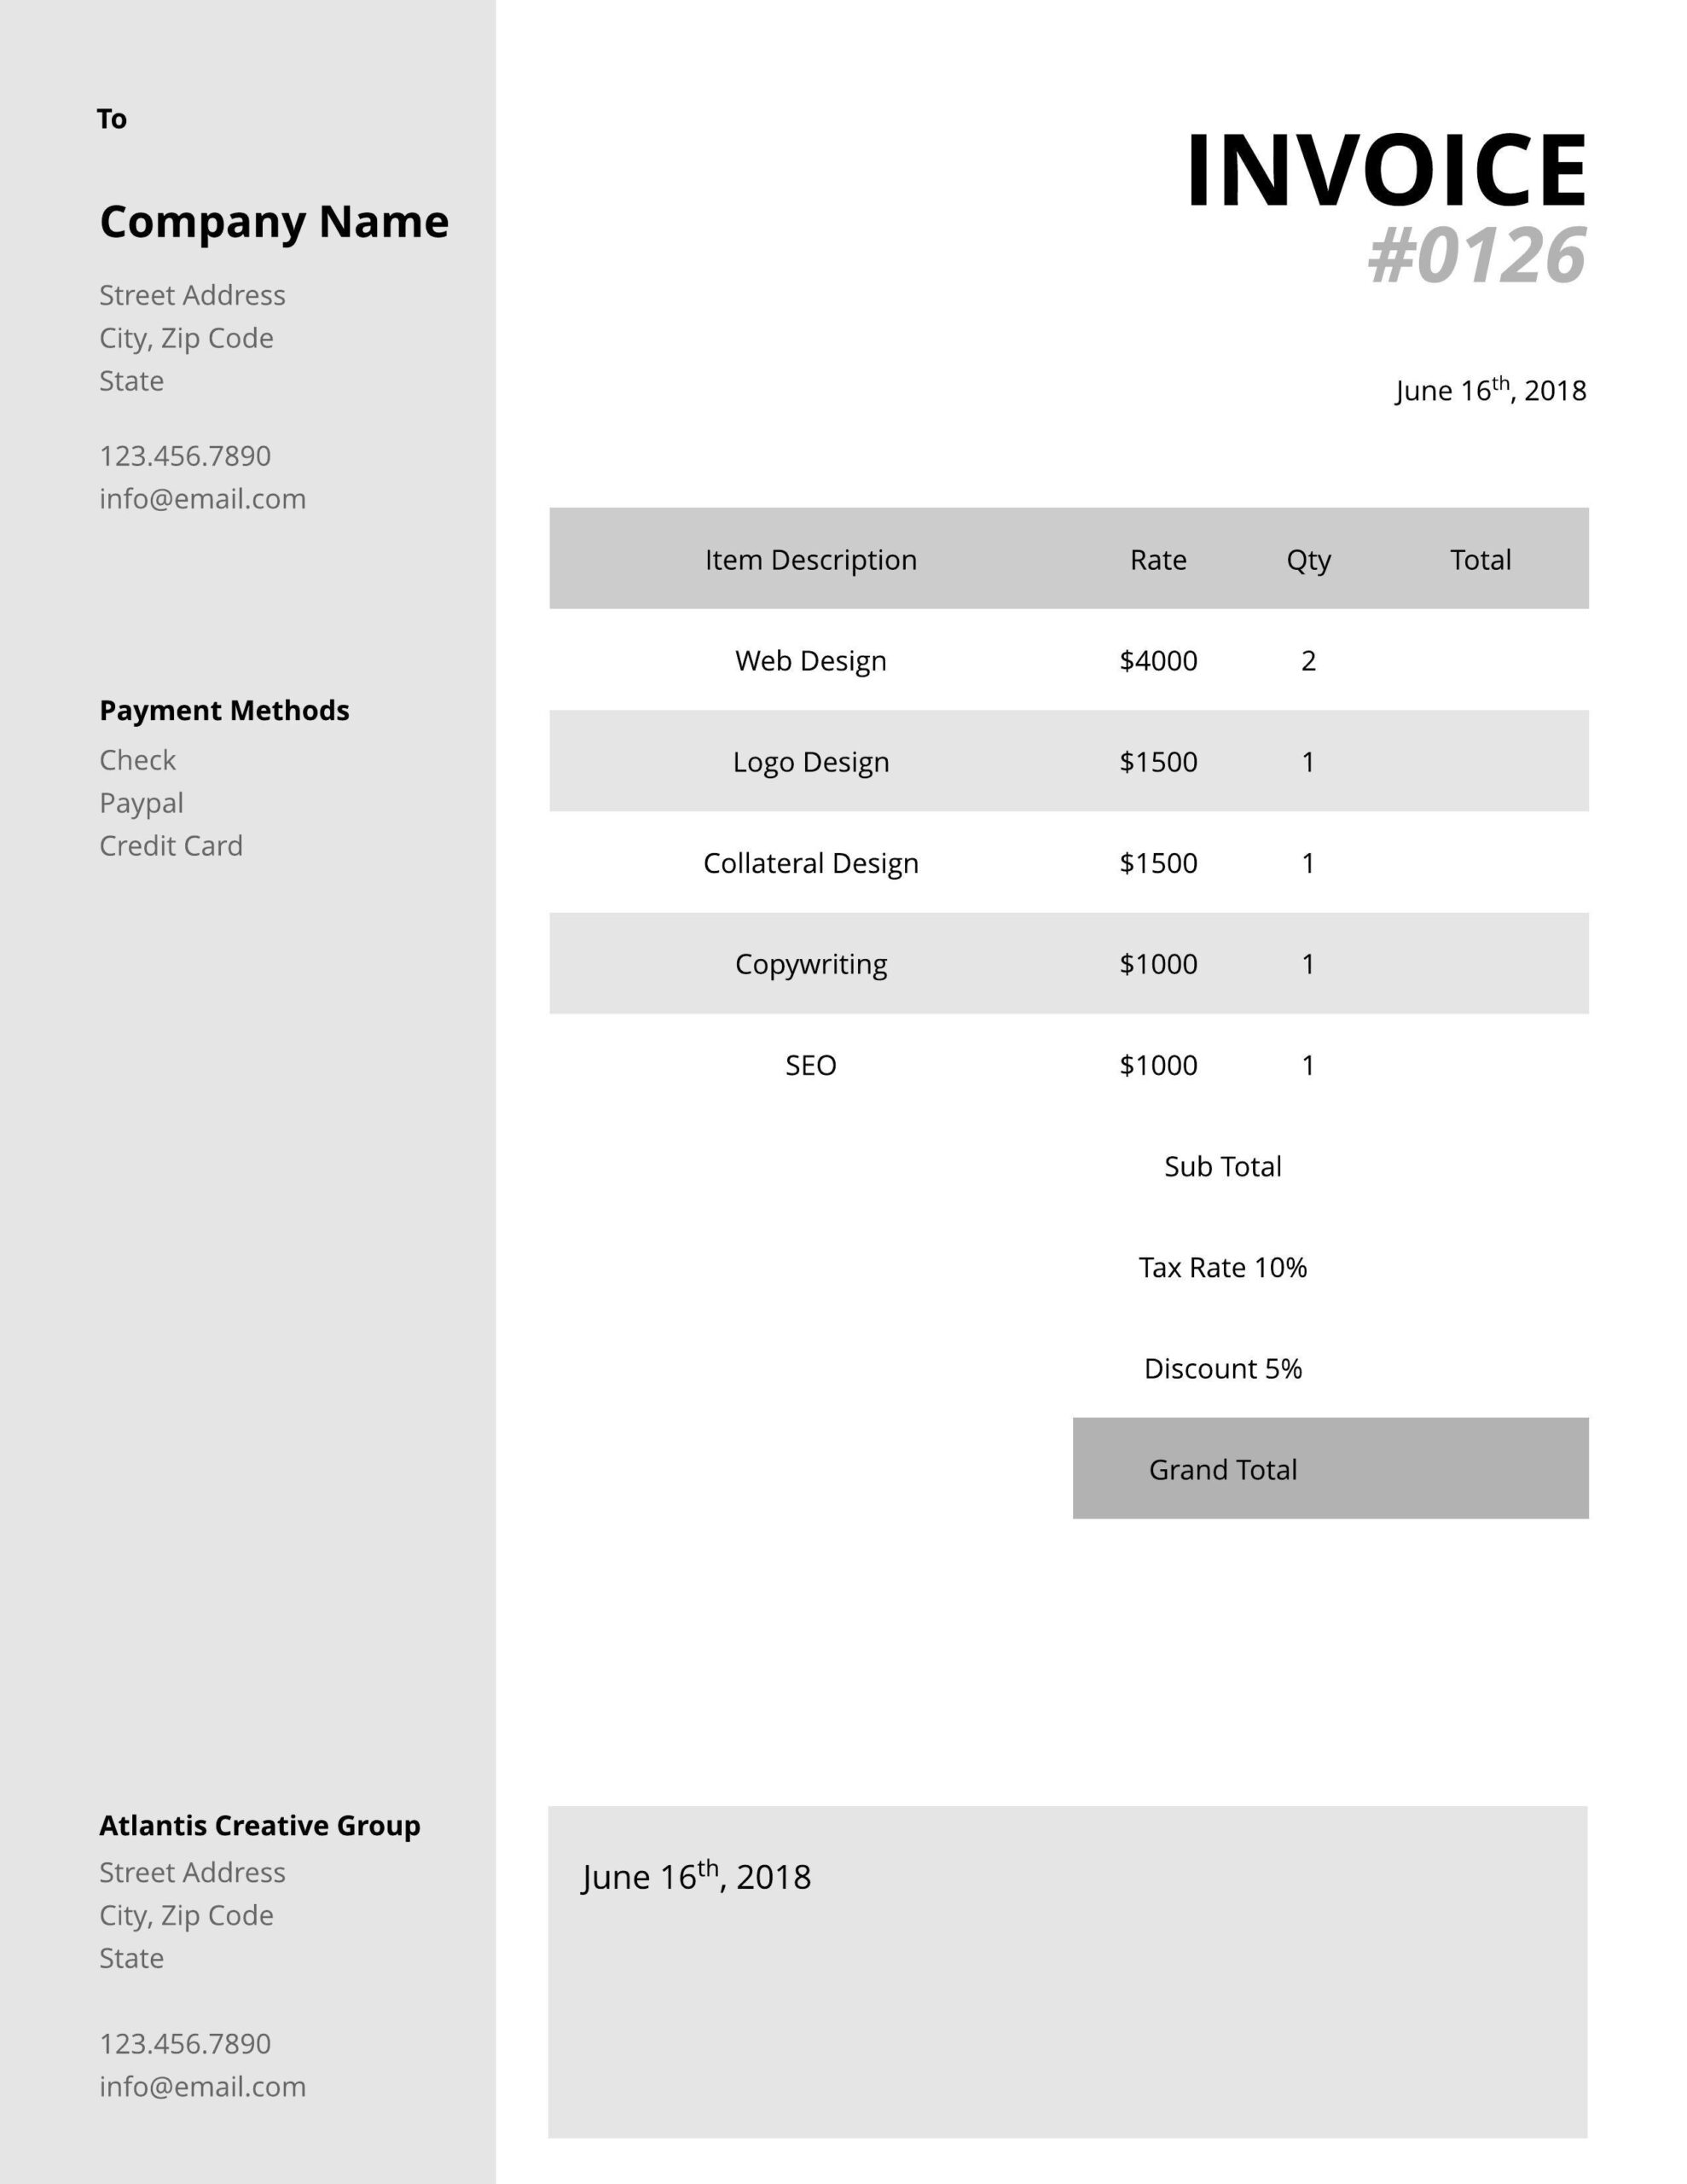 Free Invoice Templates & Examples | Lucidpress For Moving Company Invoice Template Free